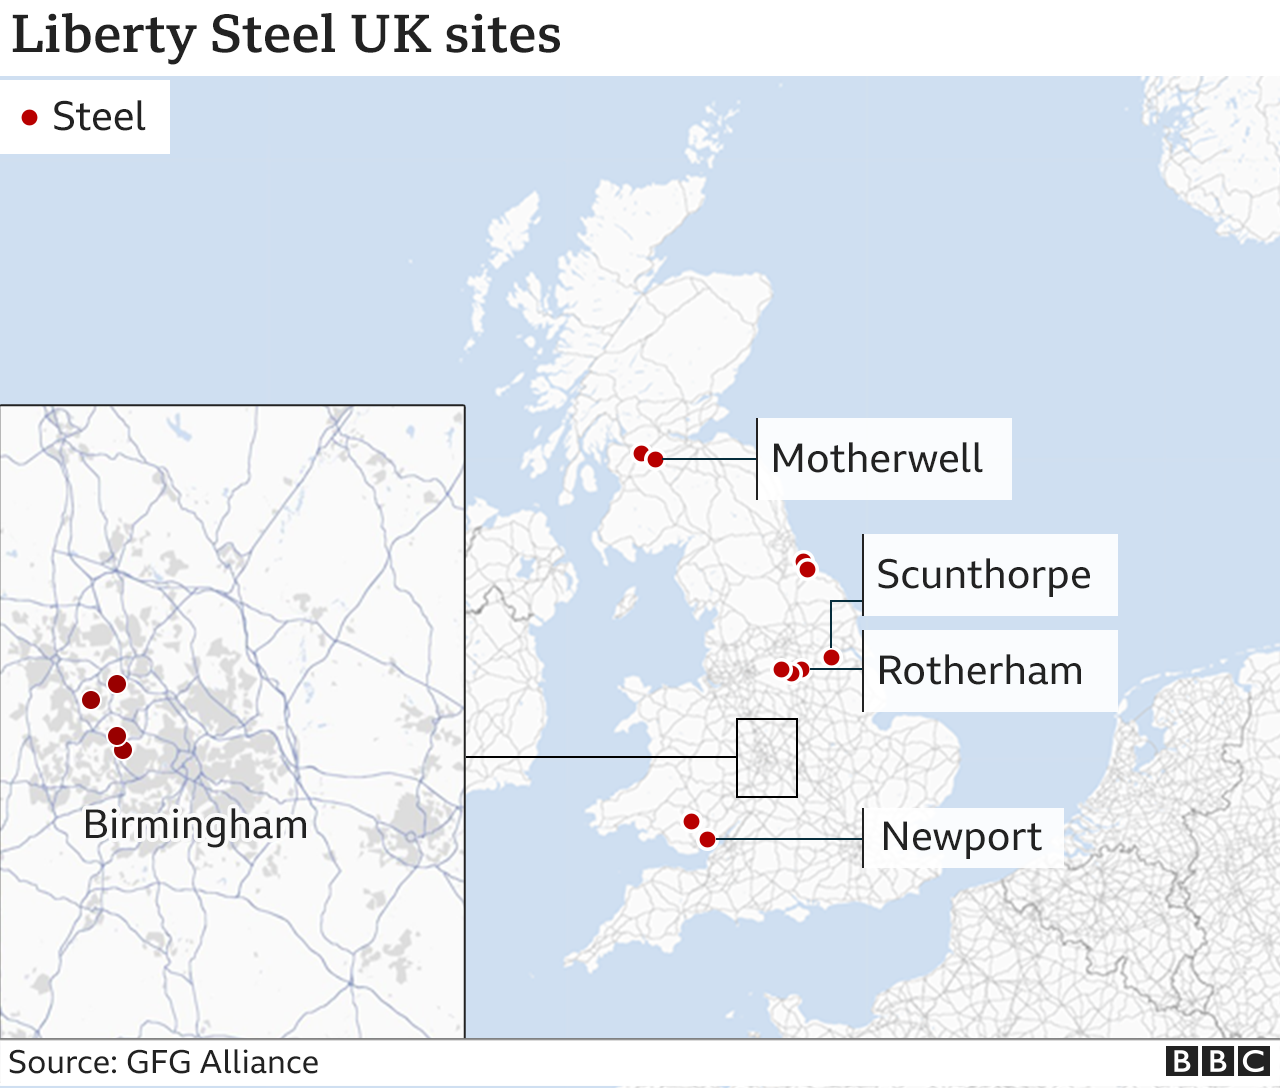 Map of UK showing position of Liberty Steel facilities